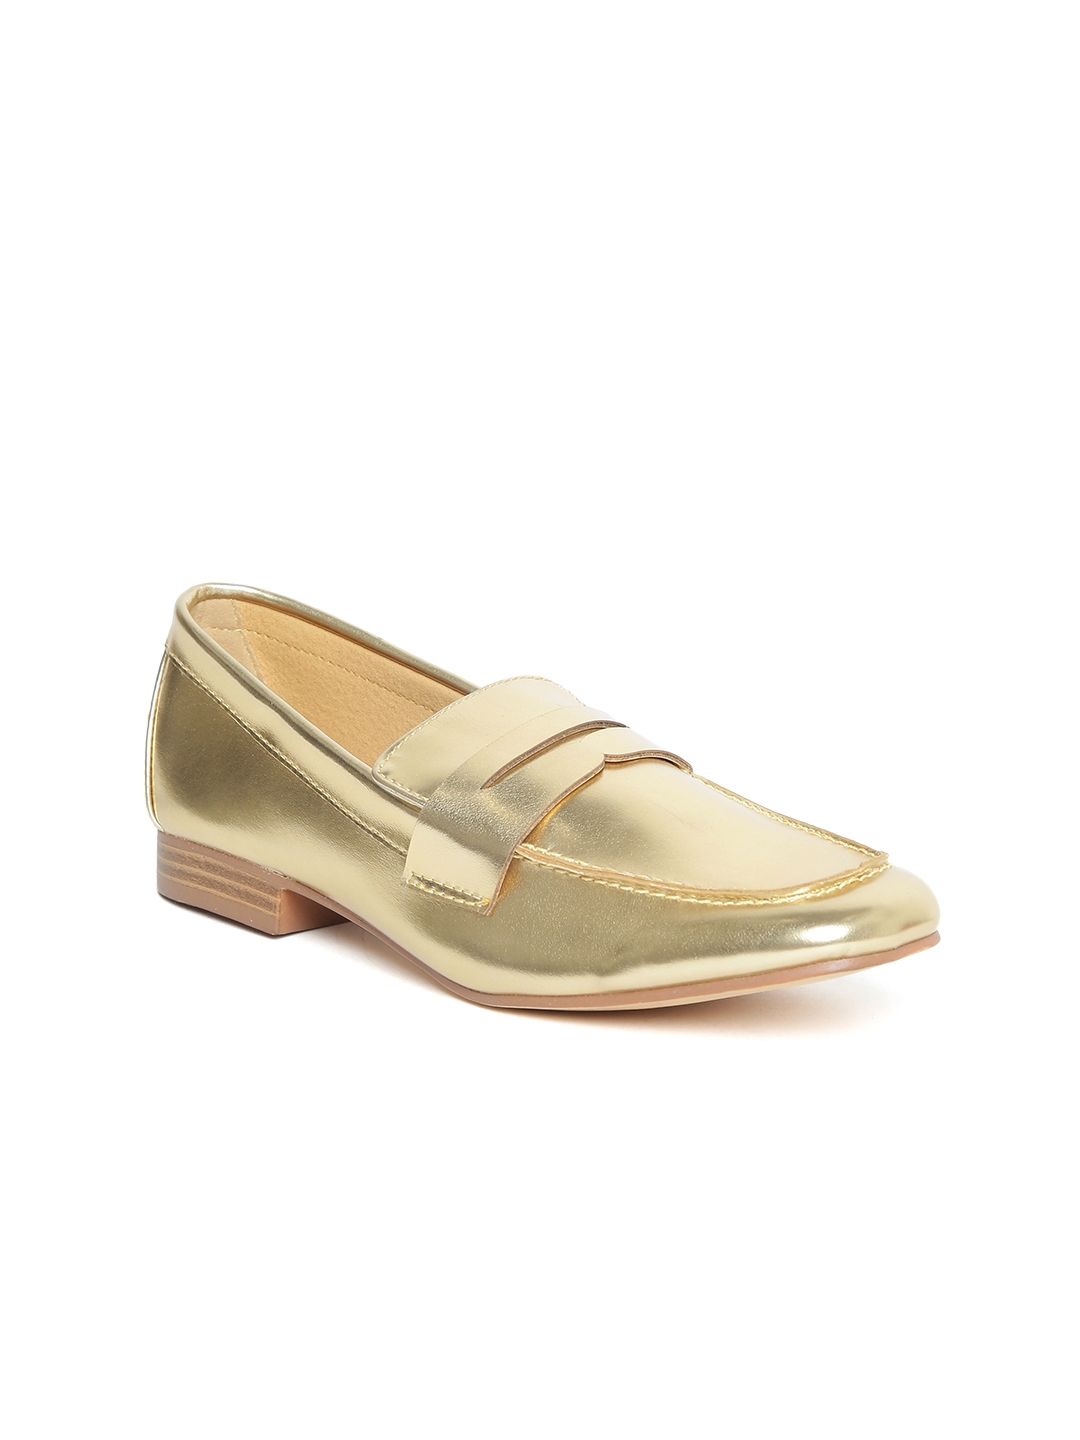 Buy FOREVER 21 Women Gold Toned Loafers - Casual Shoes Women 4377376 | Myntra